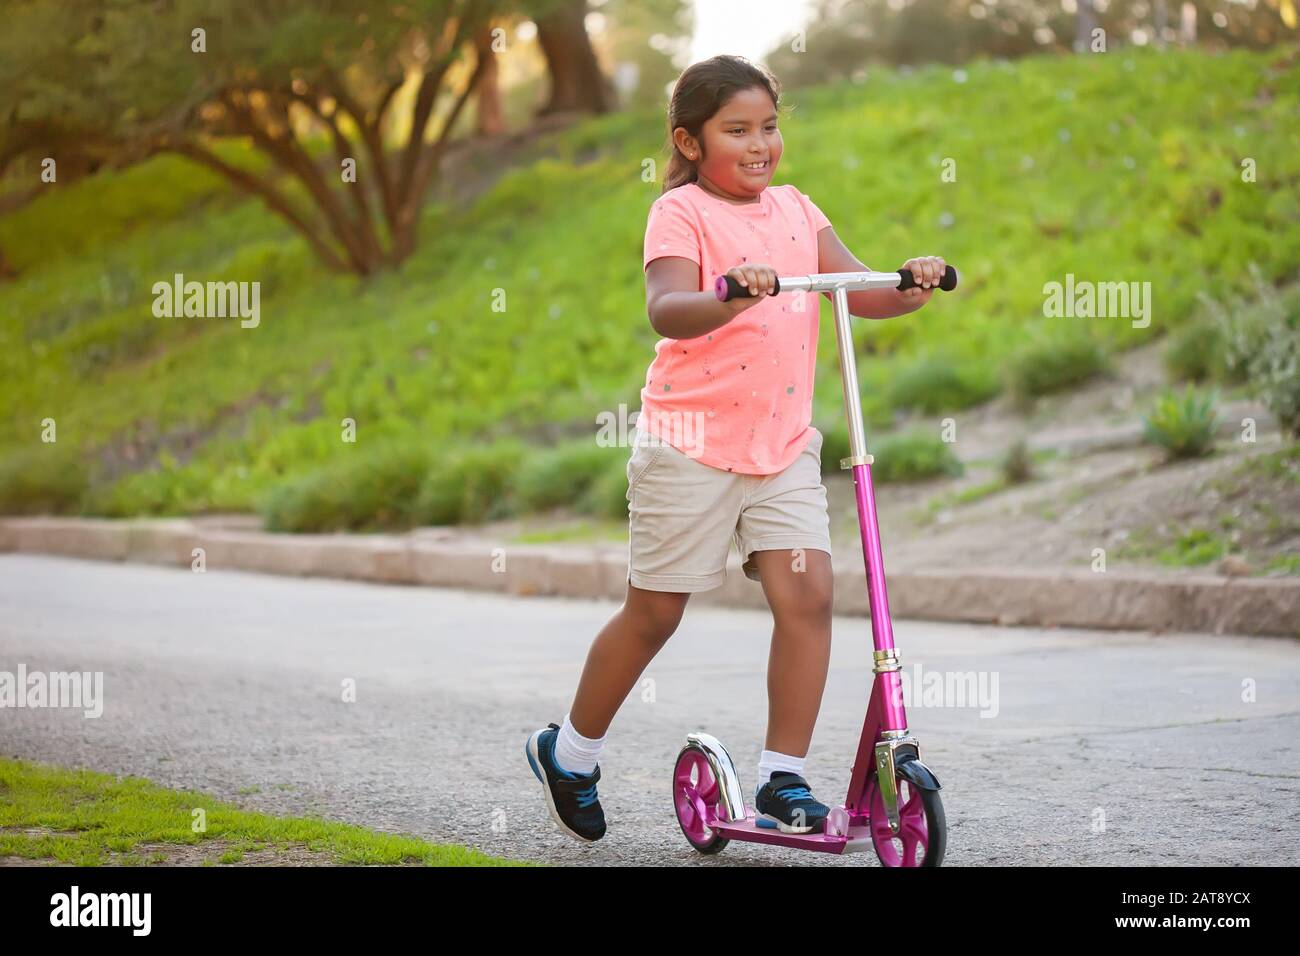 A little girl riding a pink scooter with confidence in a street lined with trees and grass. Stock Photo